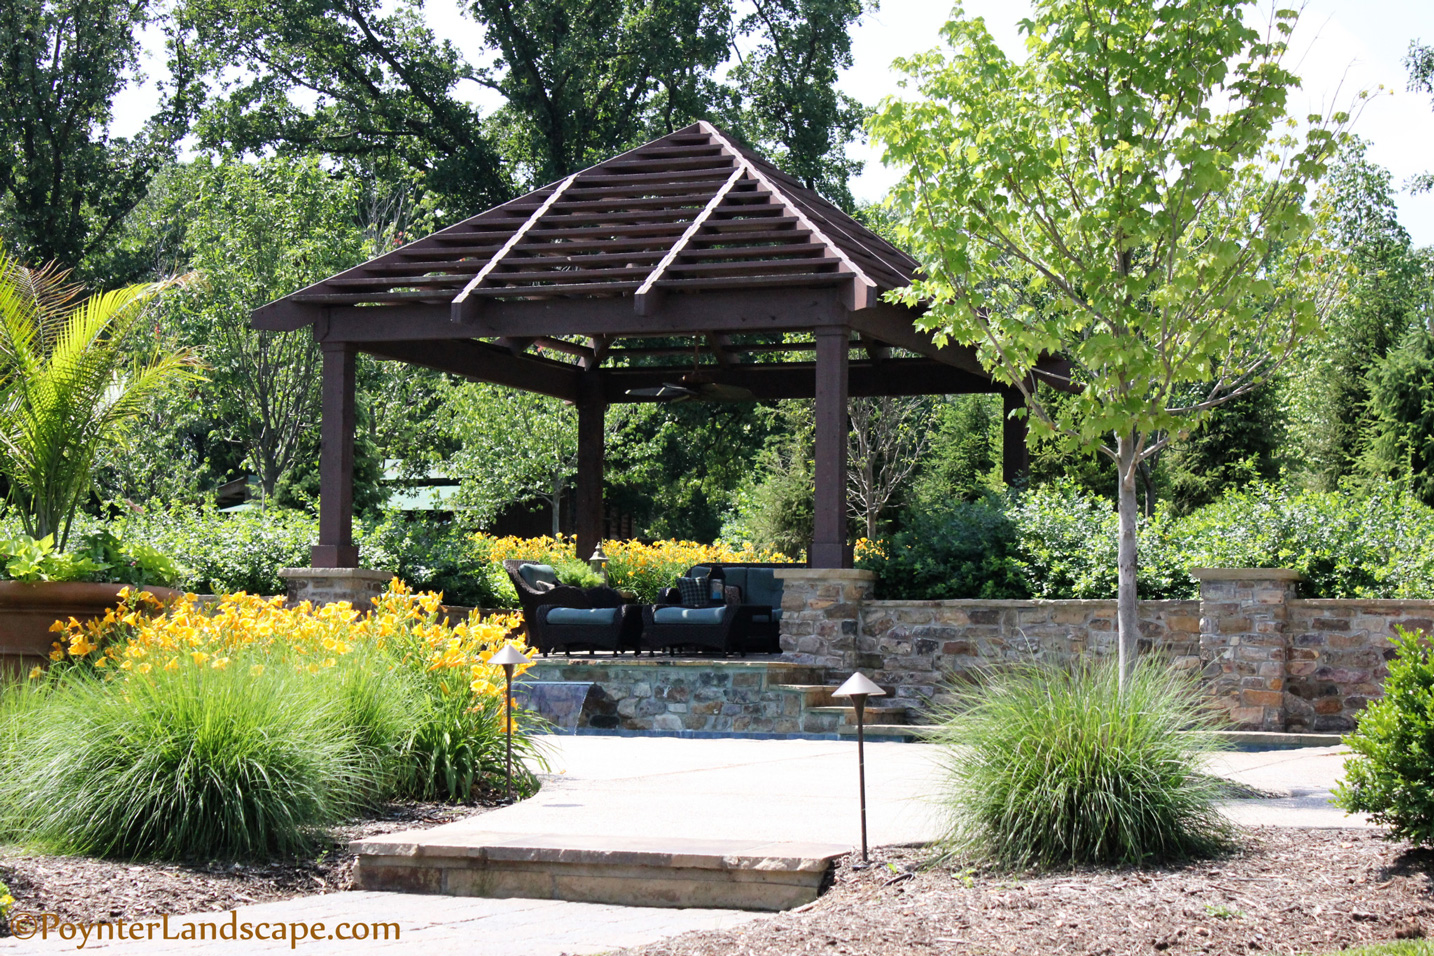 Outdoor Landscaping Company St. Louis, MO | St. Louis, MO Landscaping | Poynter Landscape